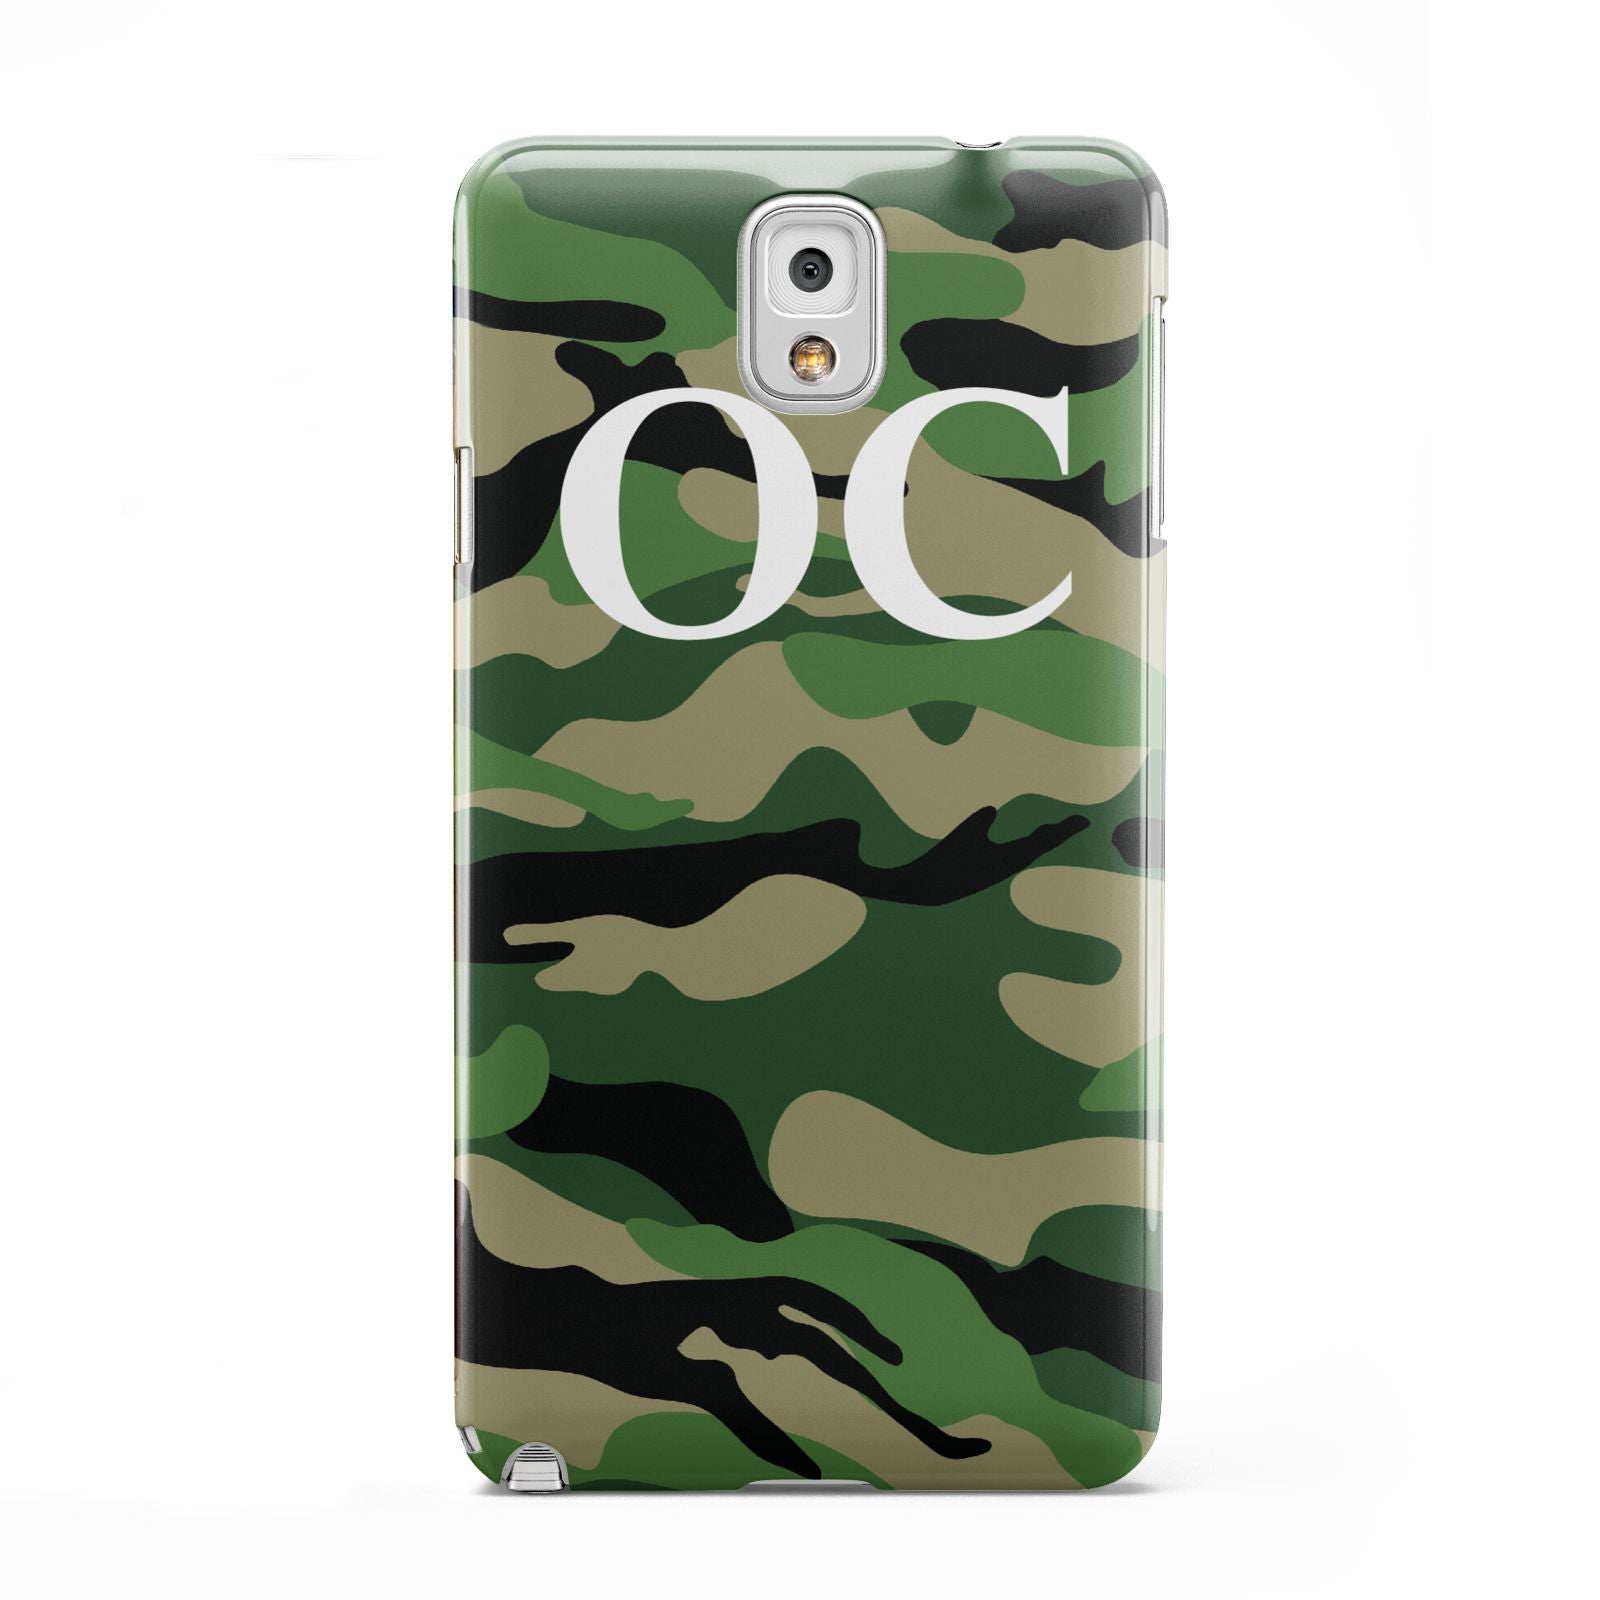 Personalised Camouflage Samsung Galaxy Note 3 Case